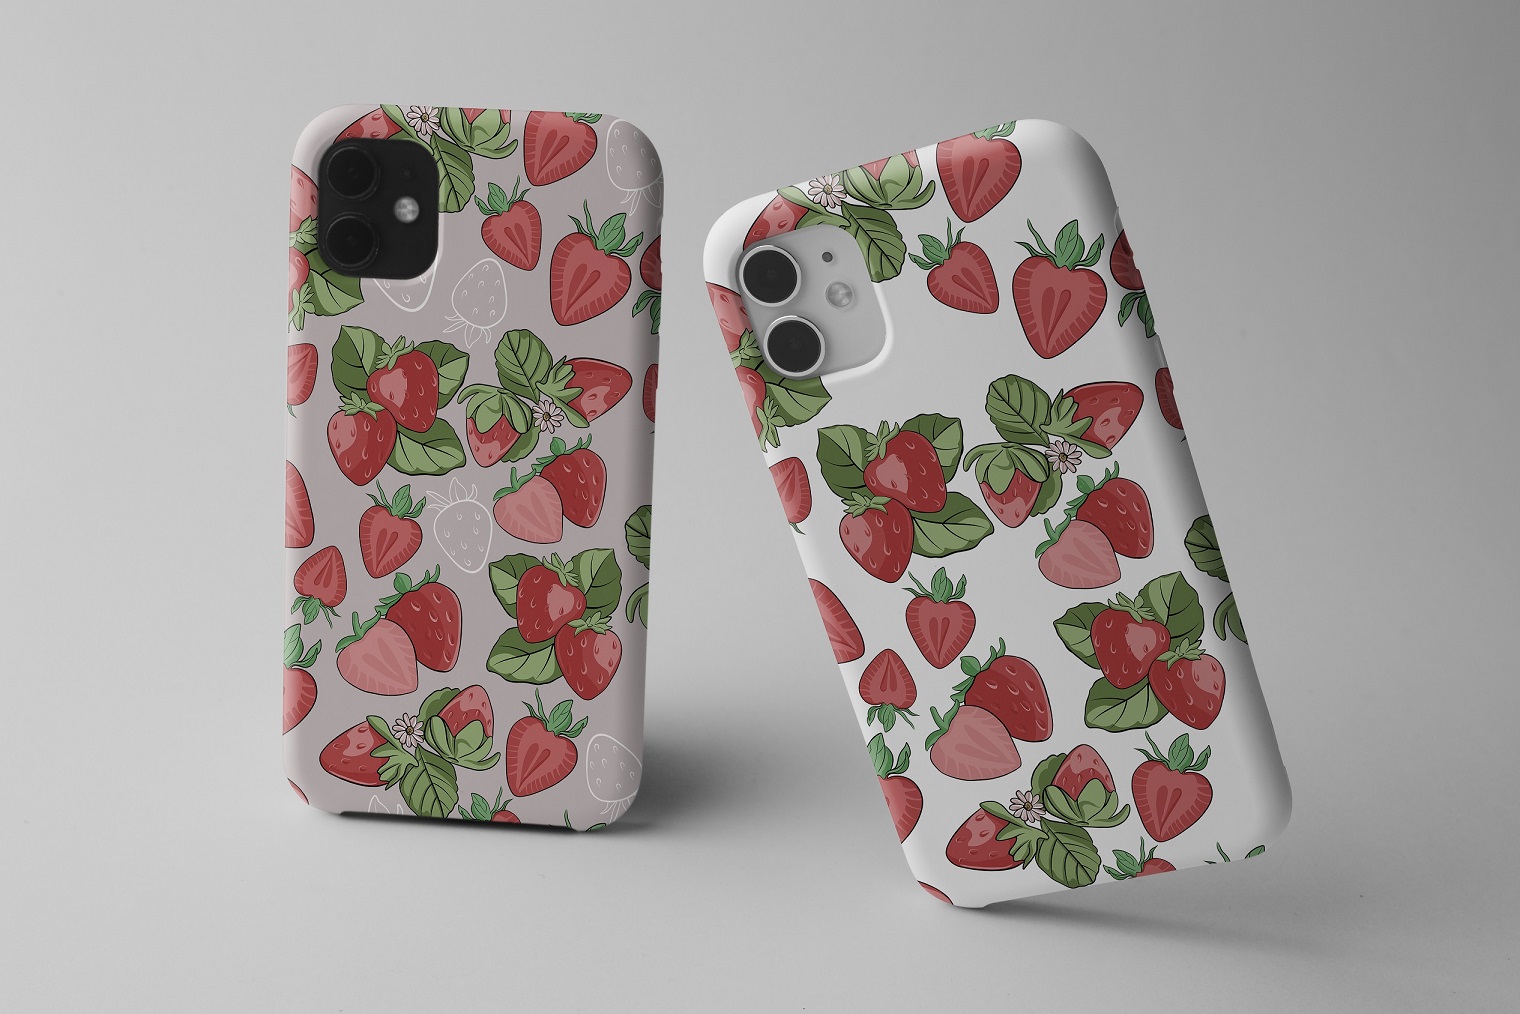 Strawberry Illustrations with case mockup.